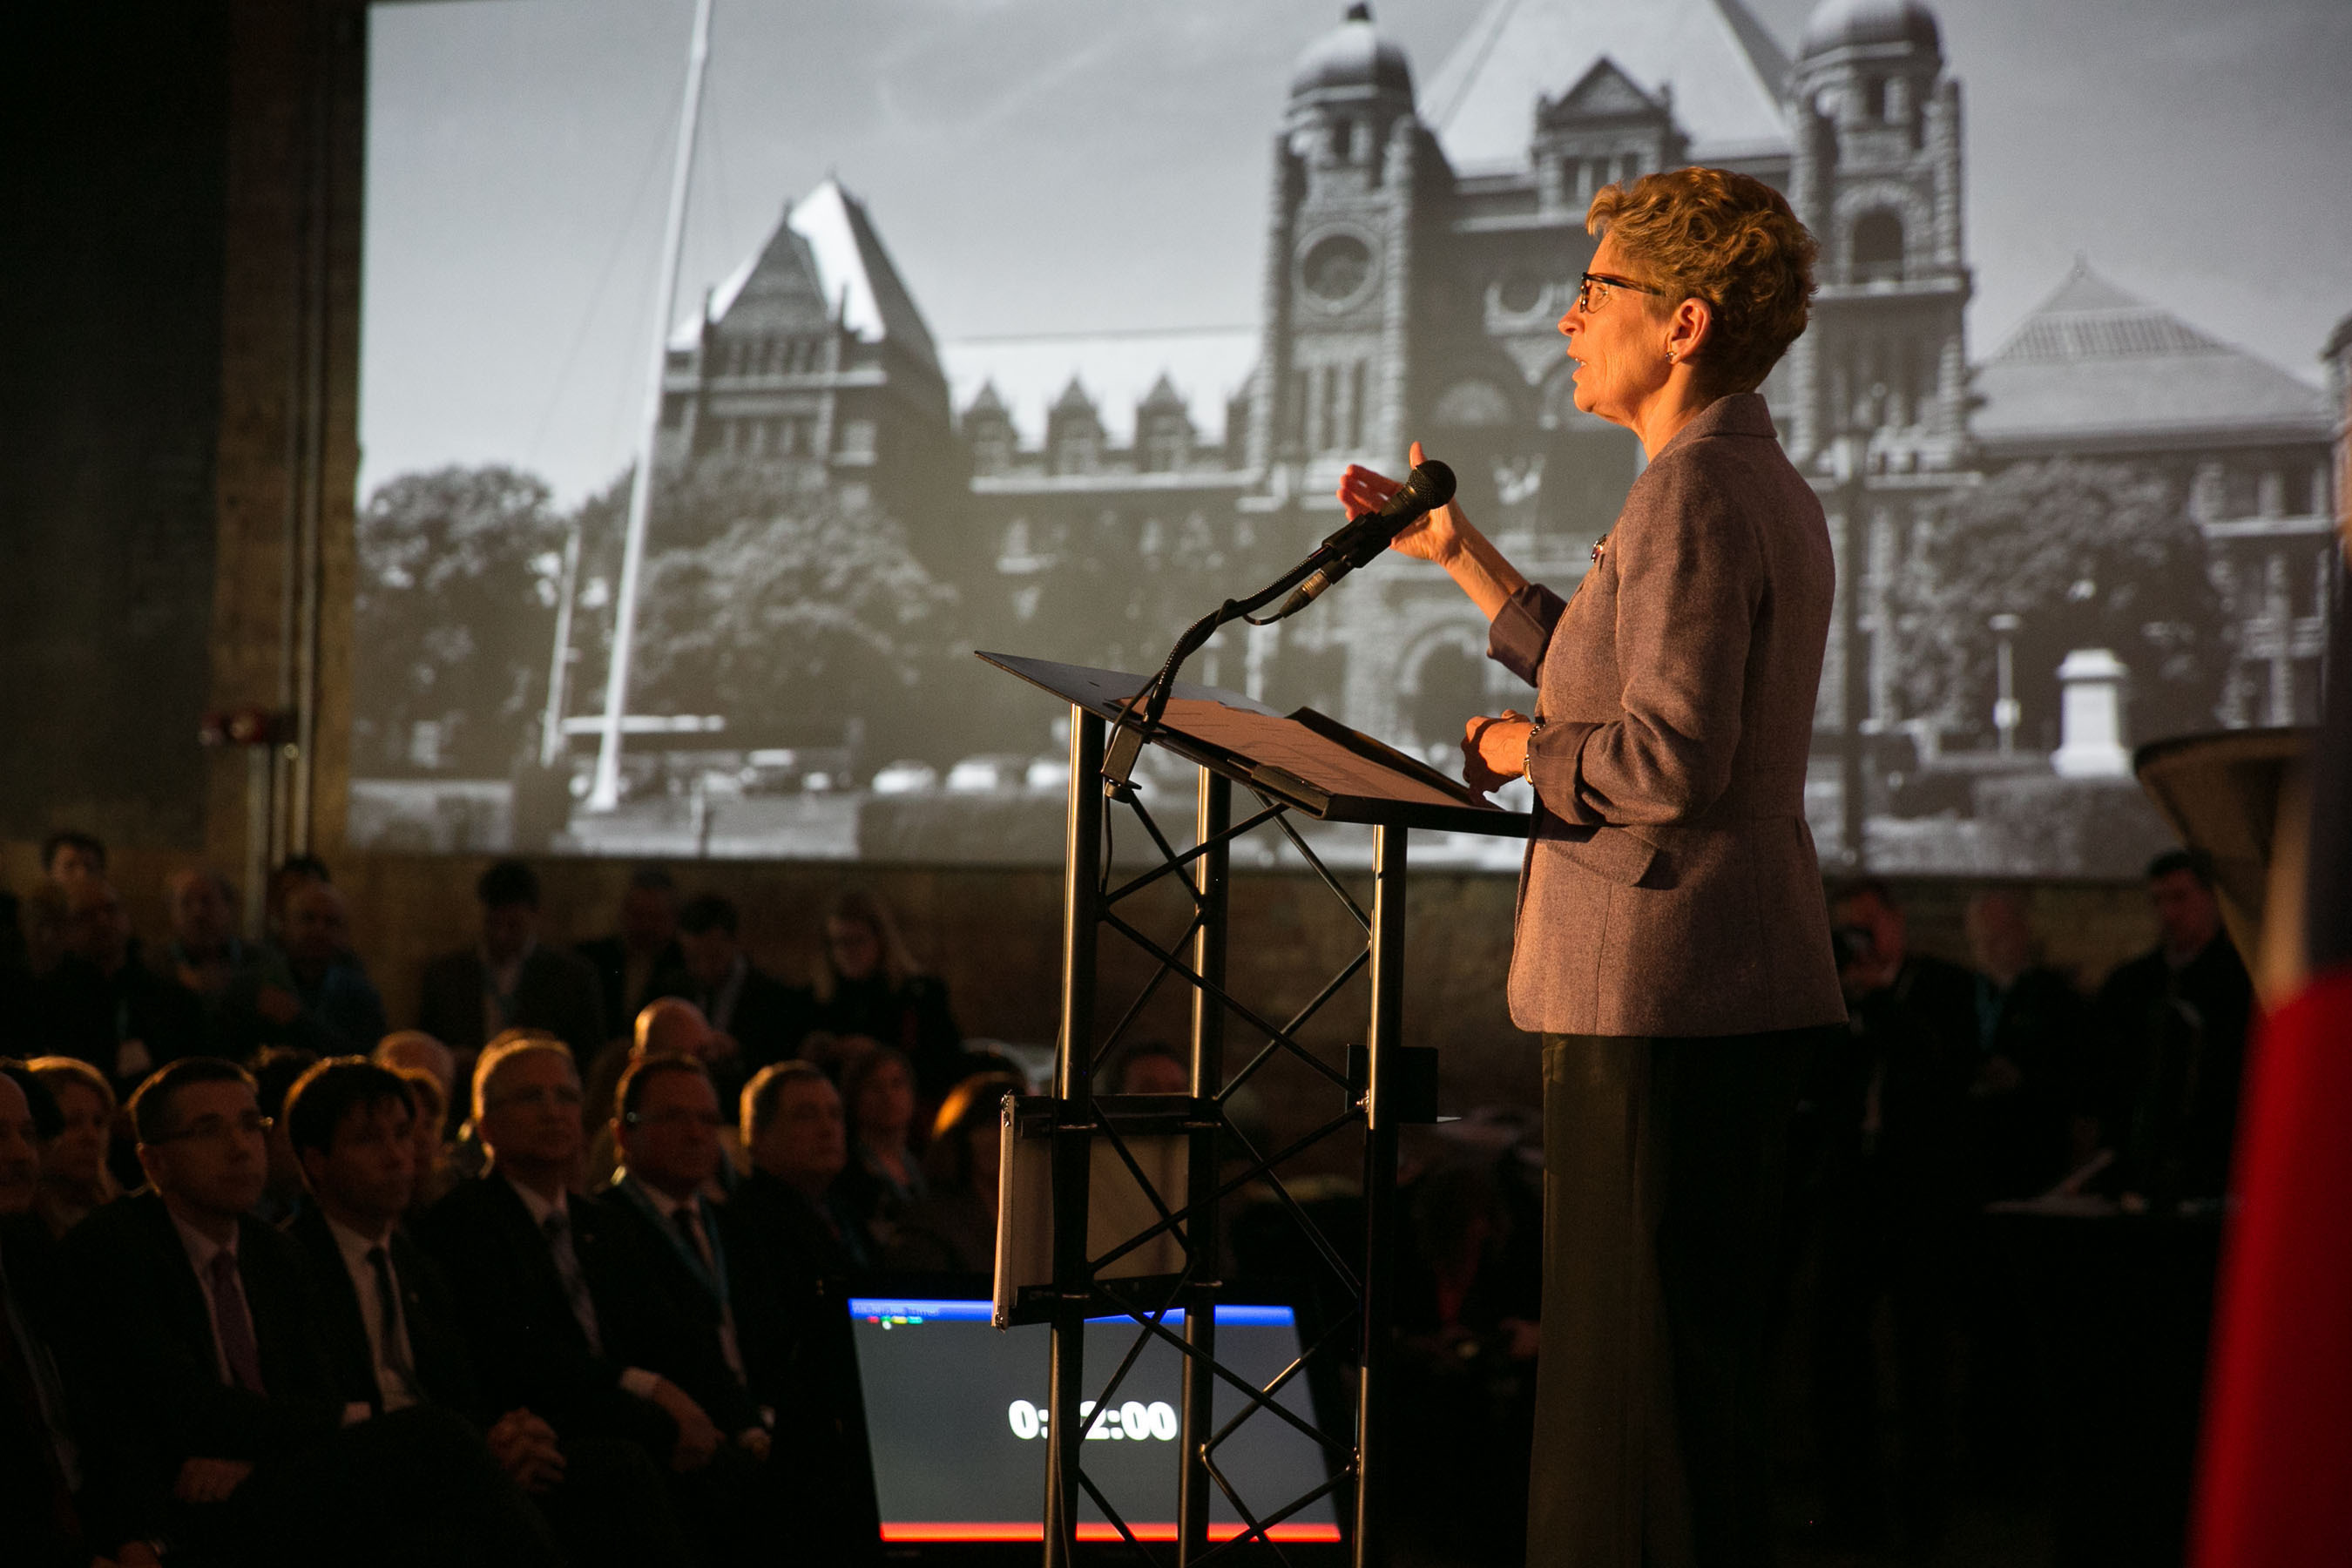 Premier Wynne at Communitech in Waterloo, Ontario to announce a new venture capital fund in partnership with the federal government, as well as corporate and institutional investors. (PRNewsFoto/Ministry of Economic Development, Trade and Employment) (PRNewsFoto/MINISTRY OF ECONOMIC DEVELOPM...)